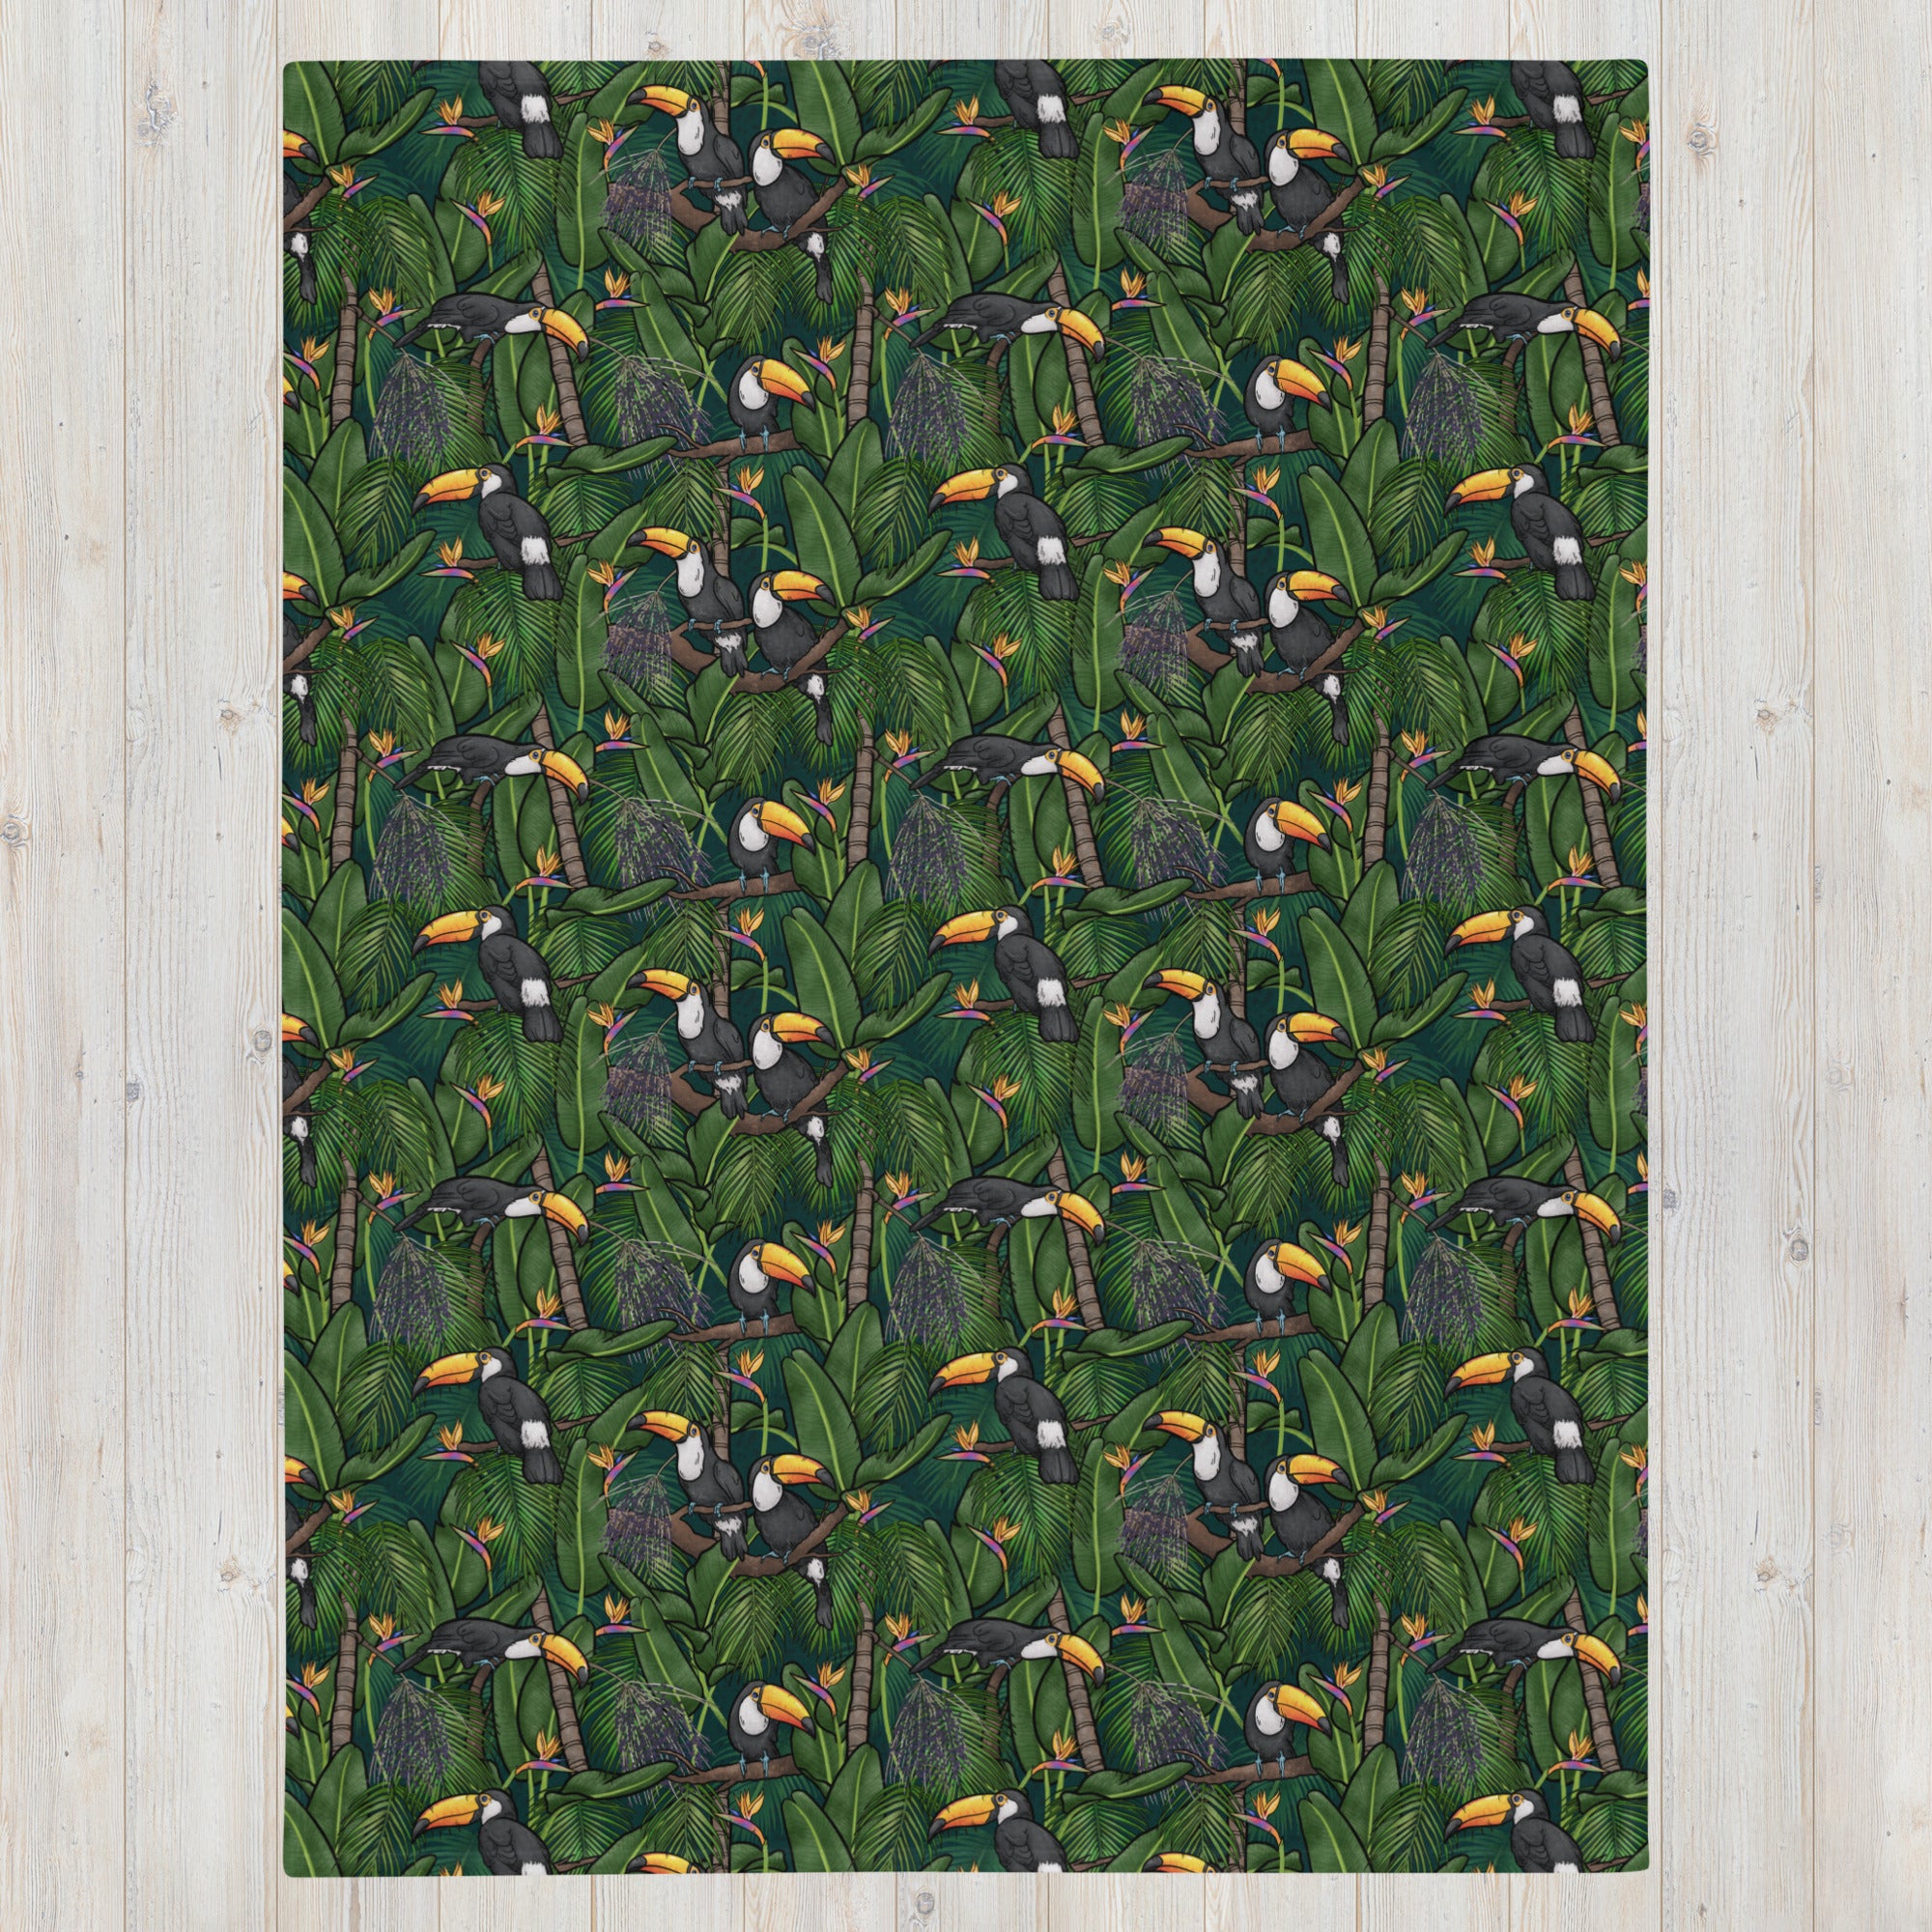 60" x 80" Toucans in the jungle throw blanket